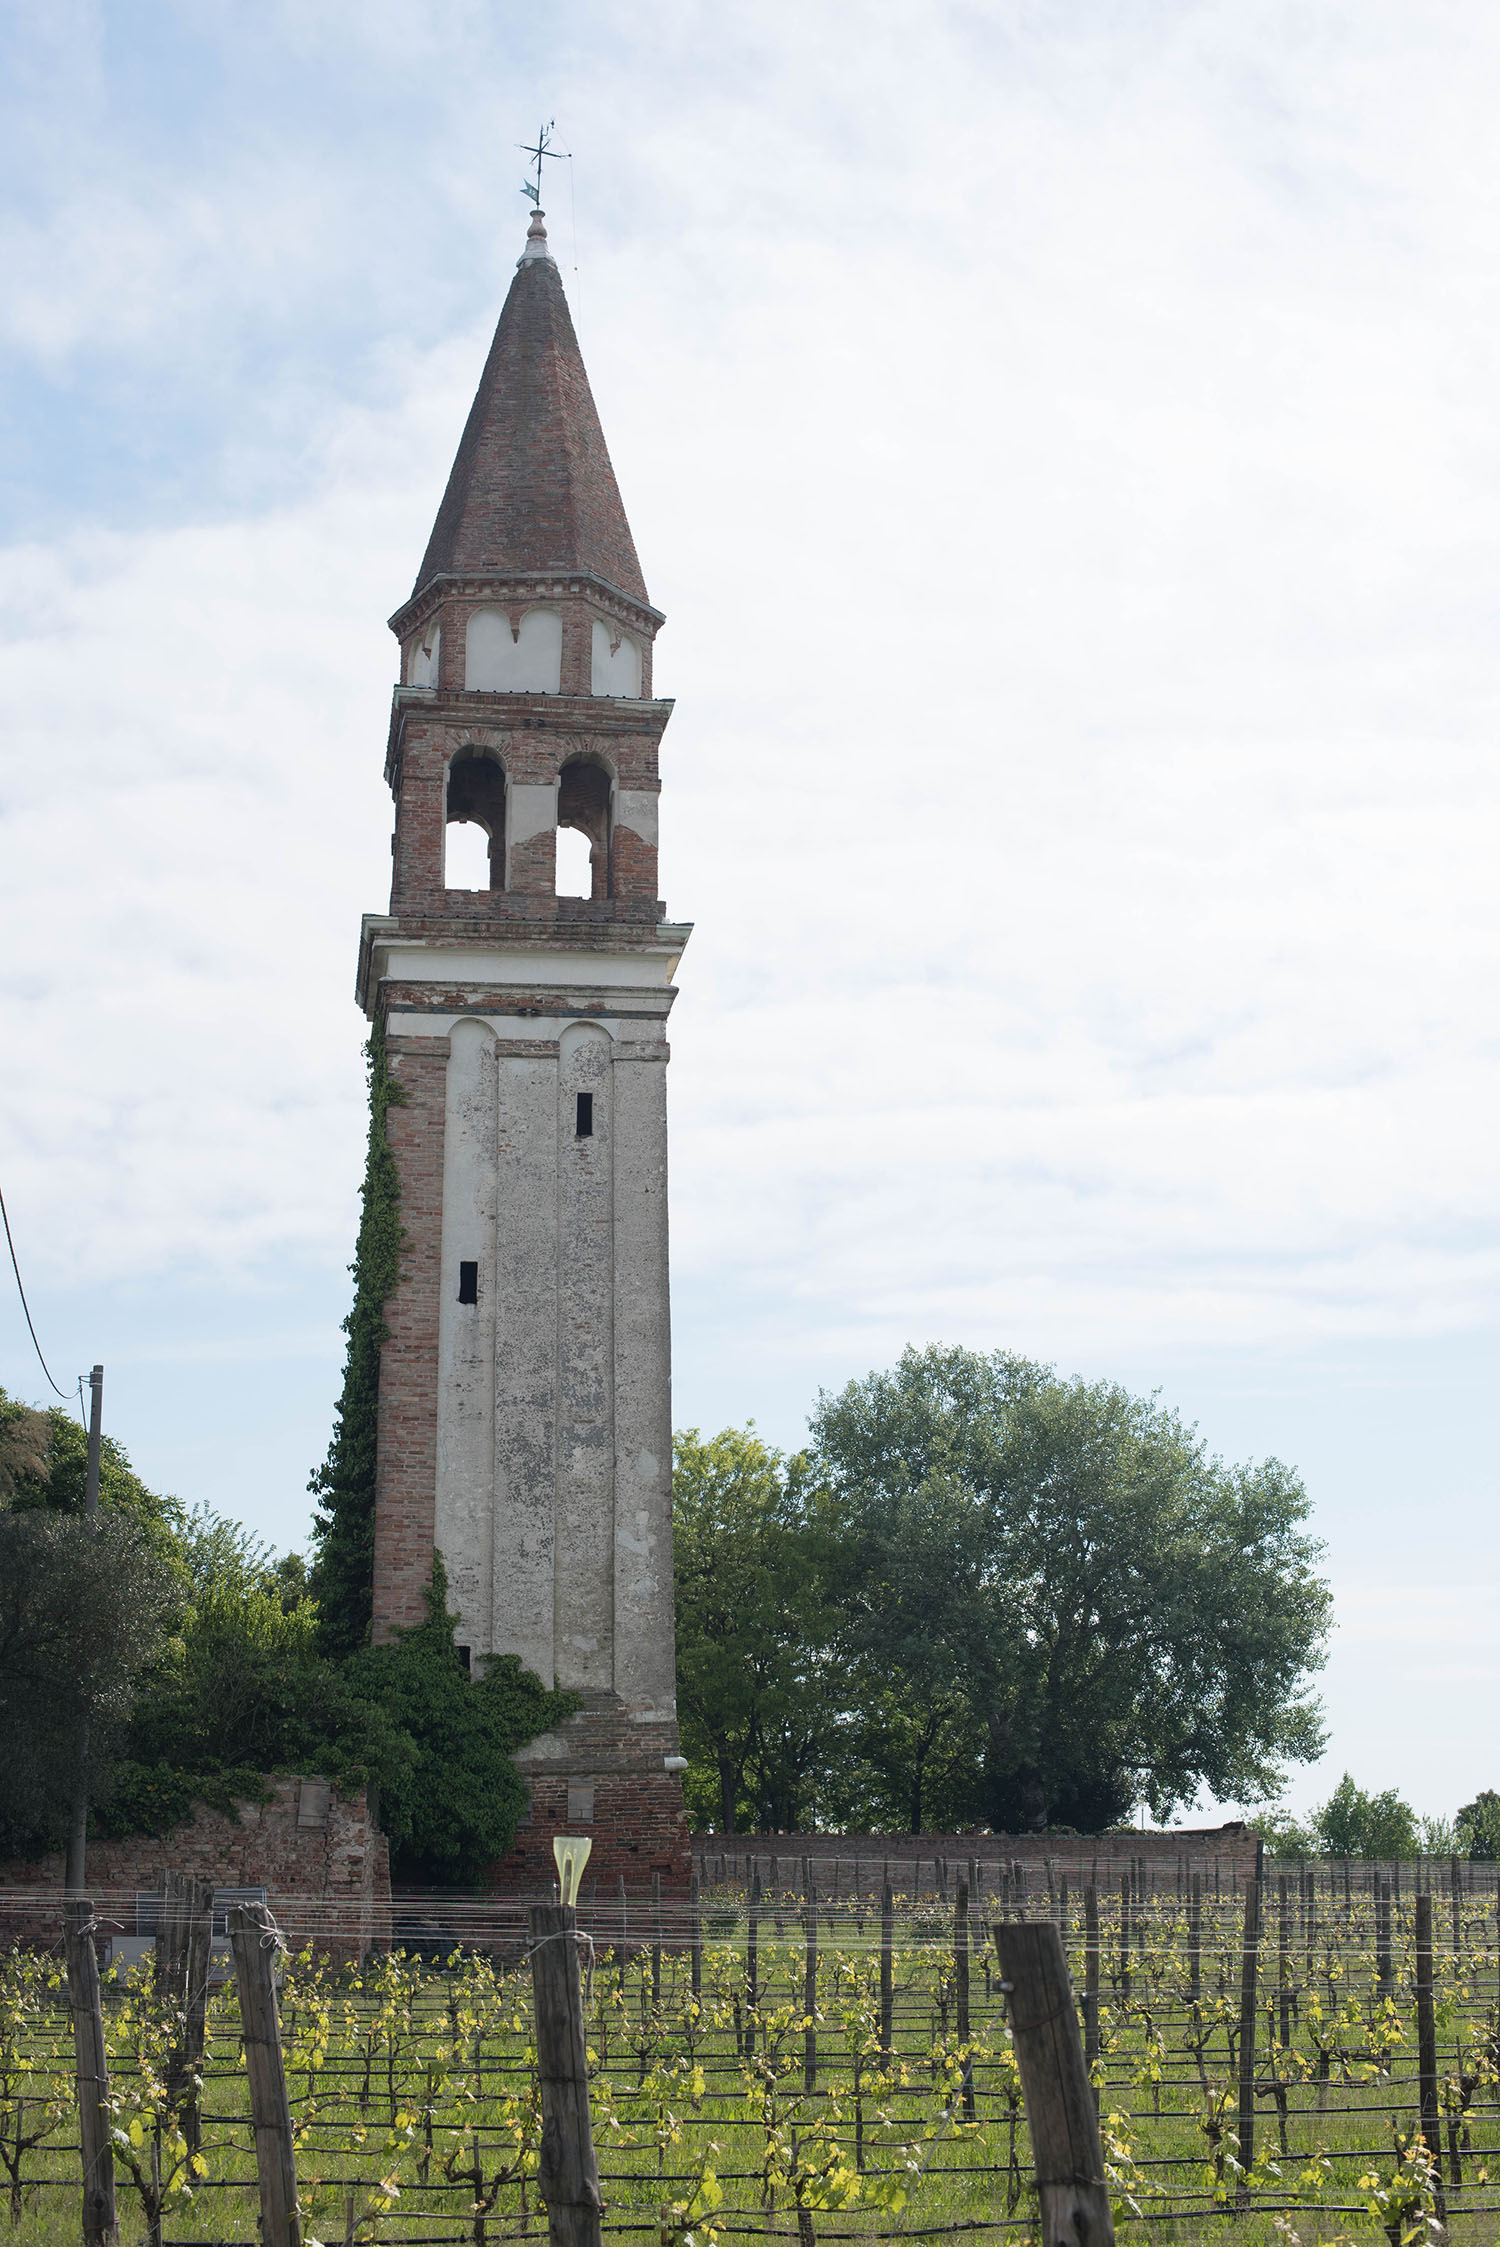 A stone tower at a winery on the island of Mazzorbo, Italy, captured by travel blogger Cee Fardoe of Coco & Vera